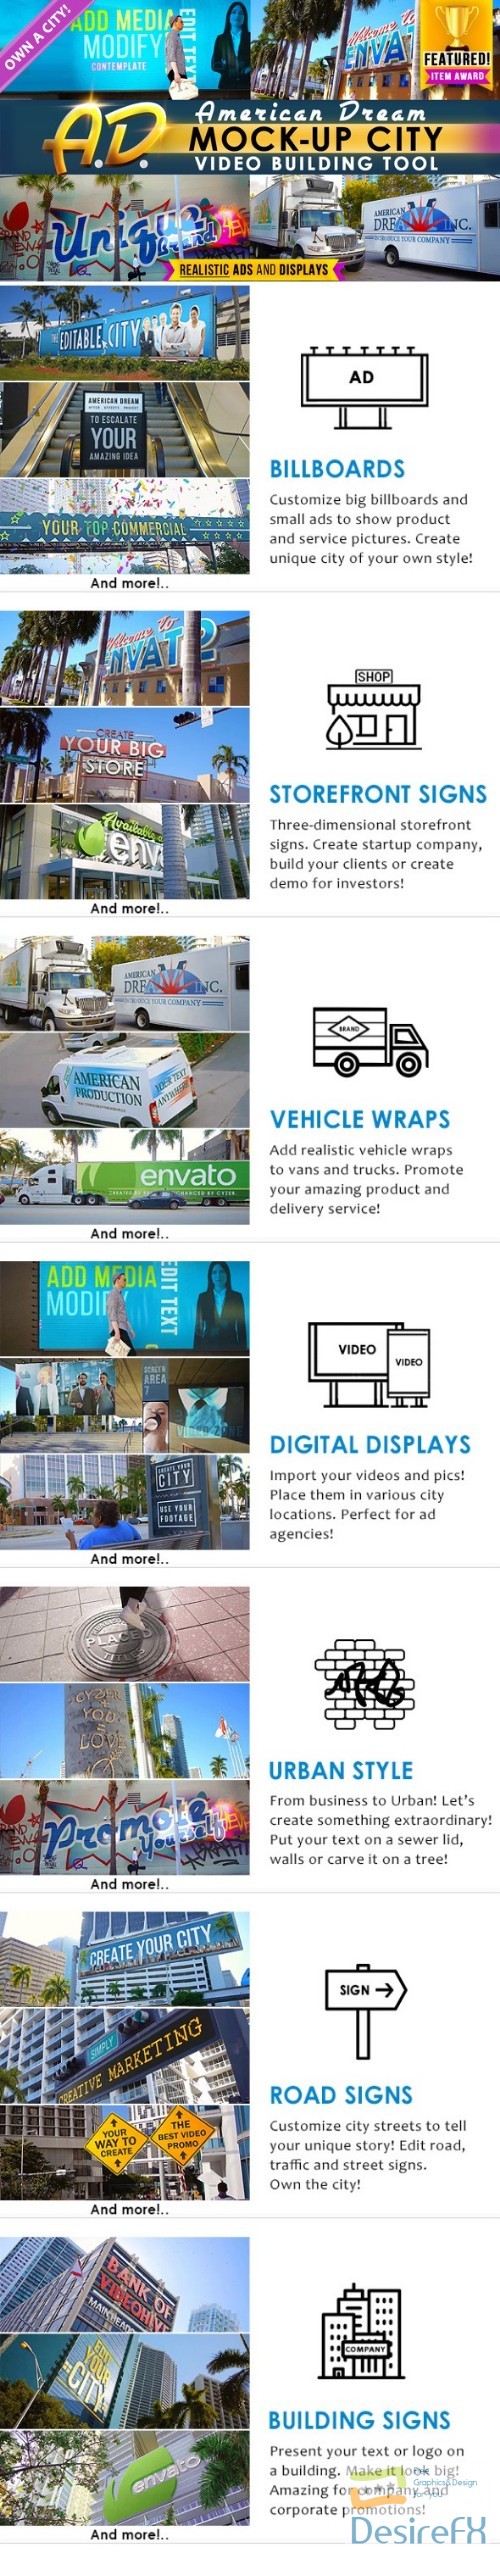 Videohive AD - City Titles Mockup Business Intro 21924523 - Last Update!